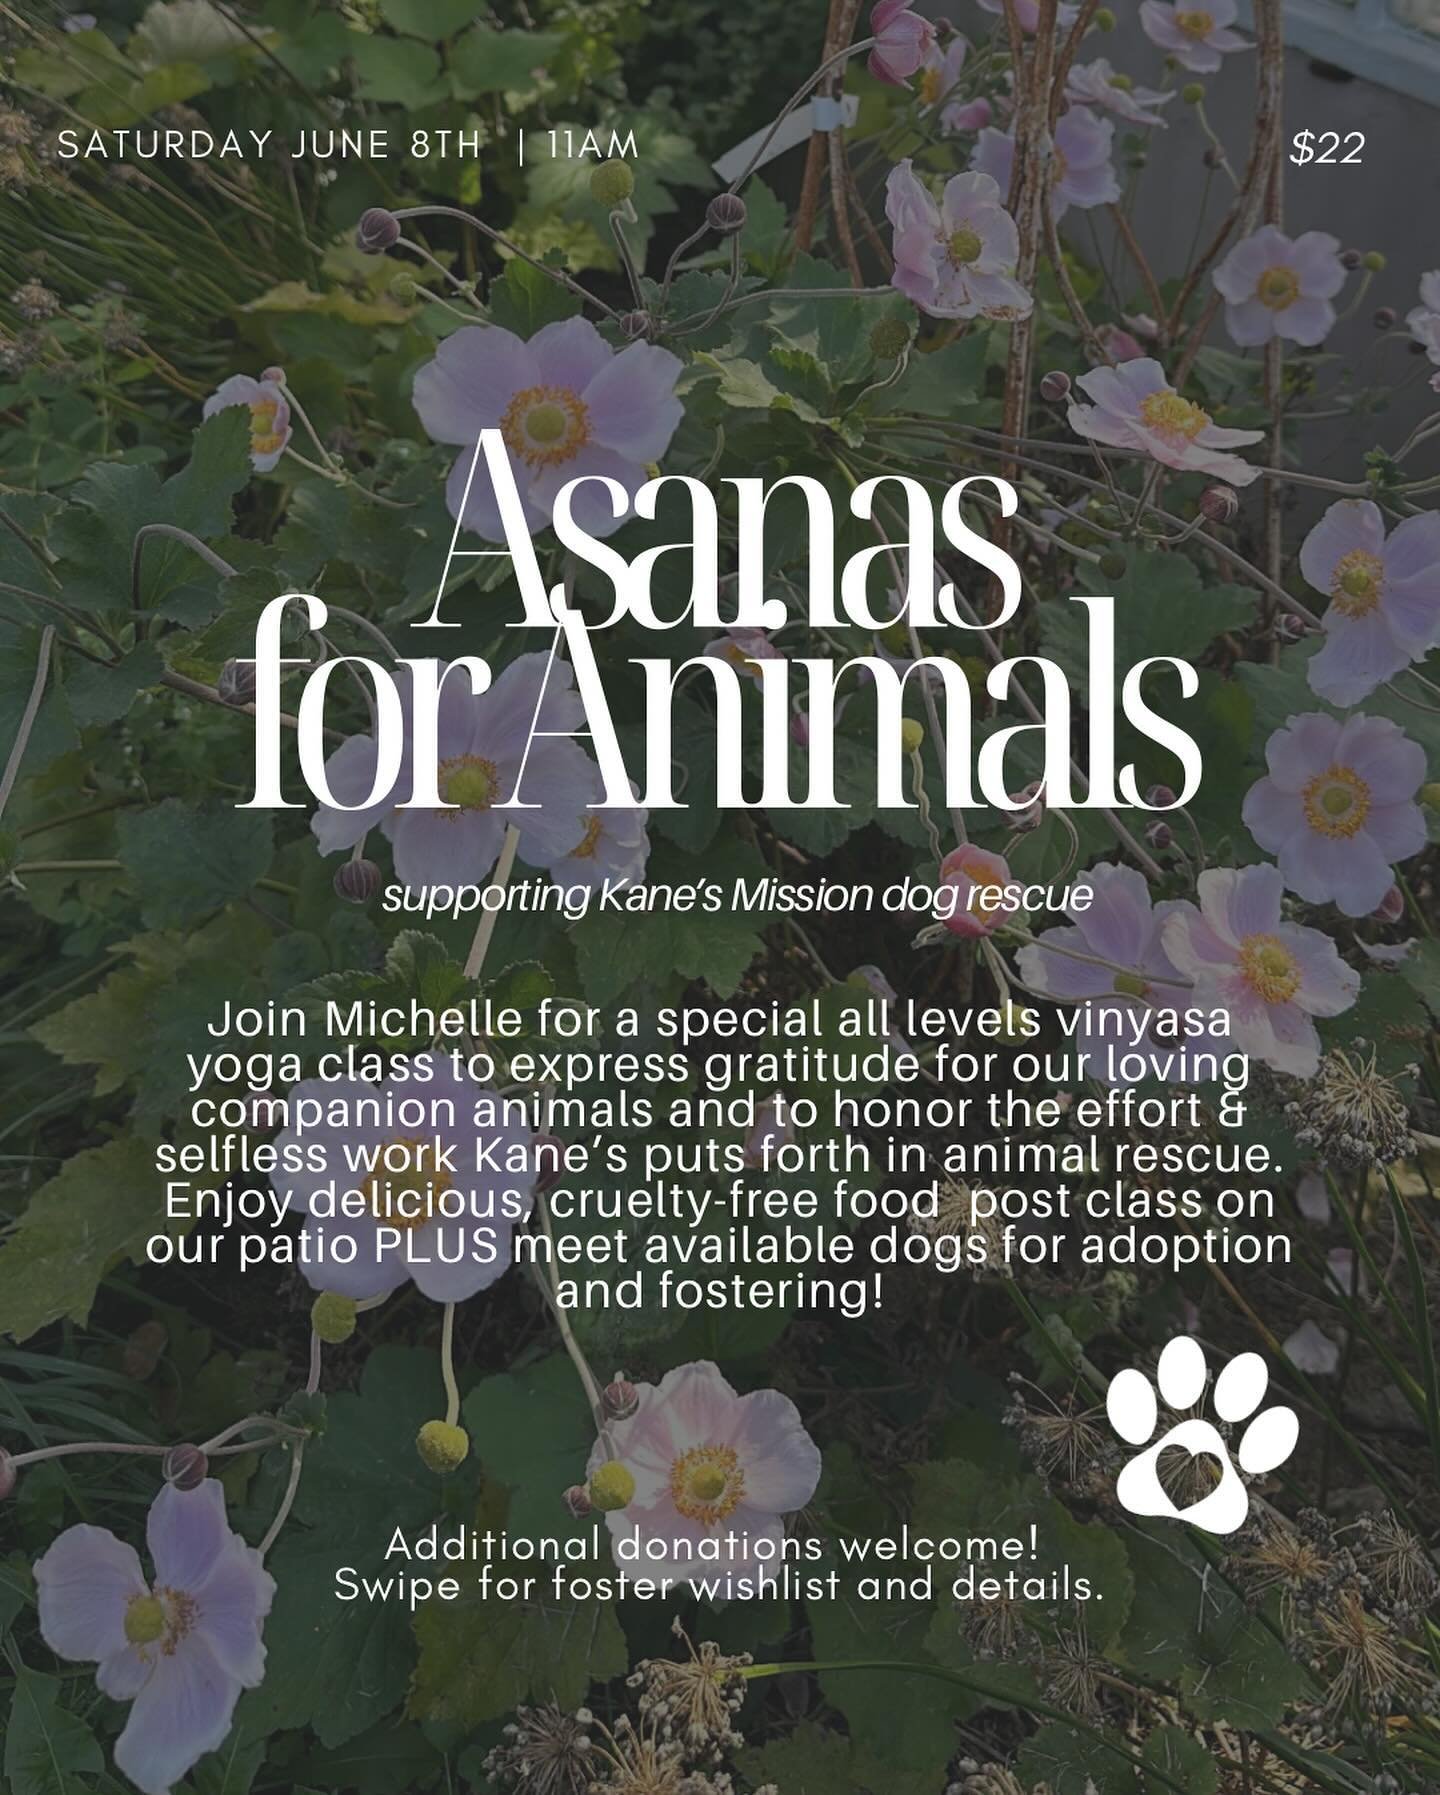 Asanas for Animals benefitting @kanesmission 🐾 Dogs are the closest thing we can think of to angels on earth, please join us on Saturday, June 8th at 11am for a special, all levels yoga class to support them. Enjoy delicious food, yoga and maybe eve